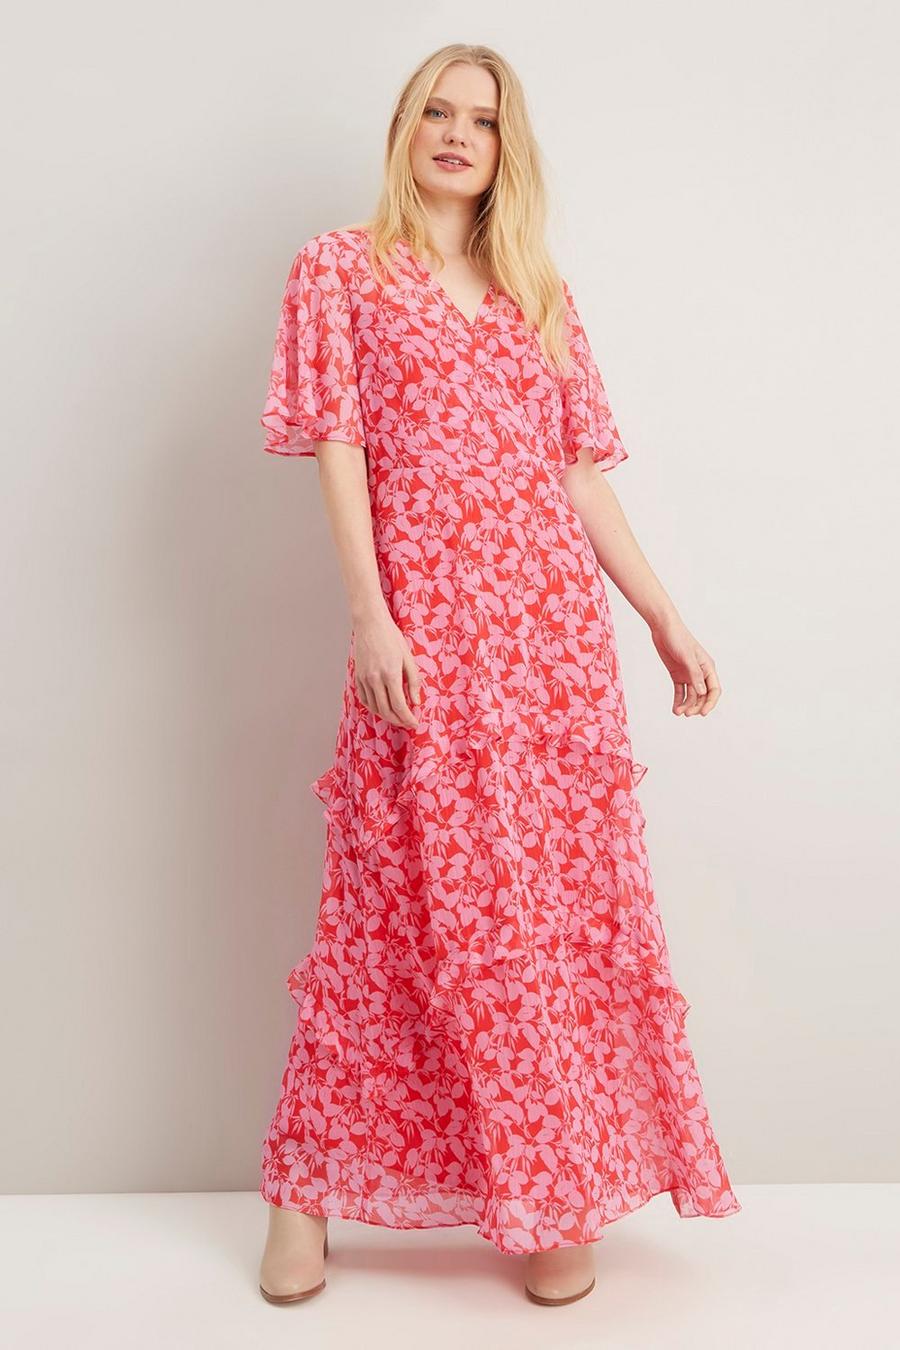 Ditsy Floral Red Pink Angel Sleeve Maxi Dress